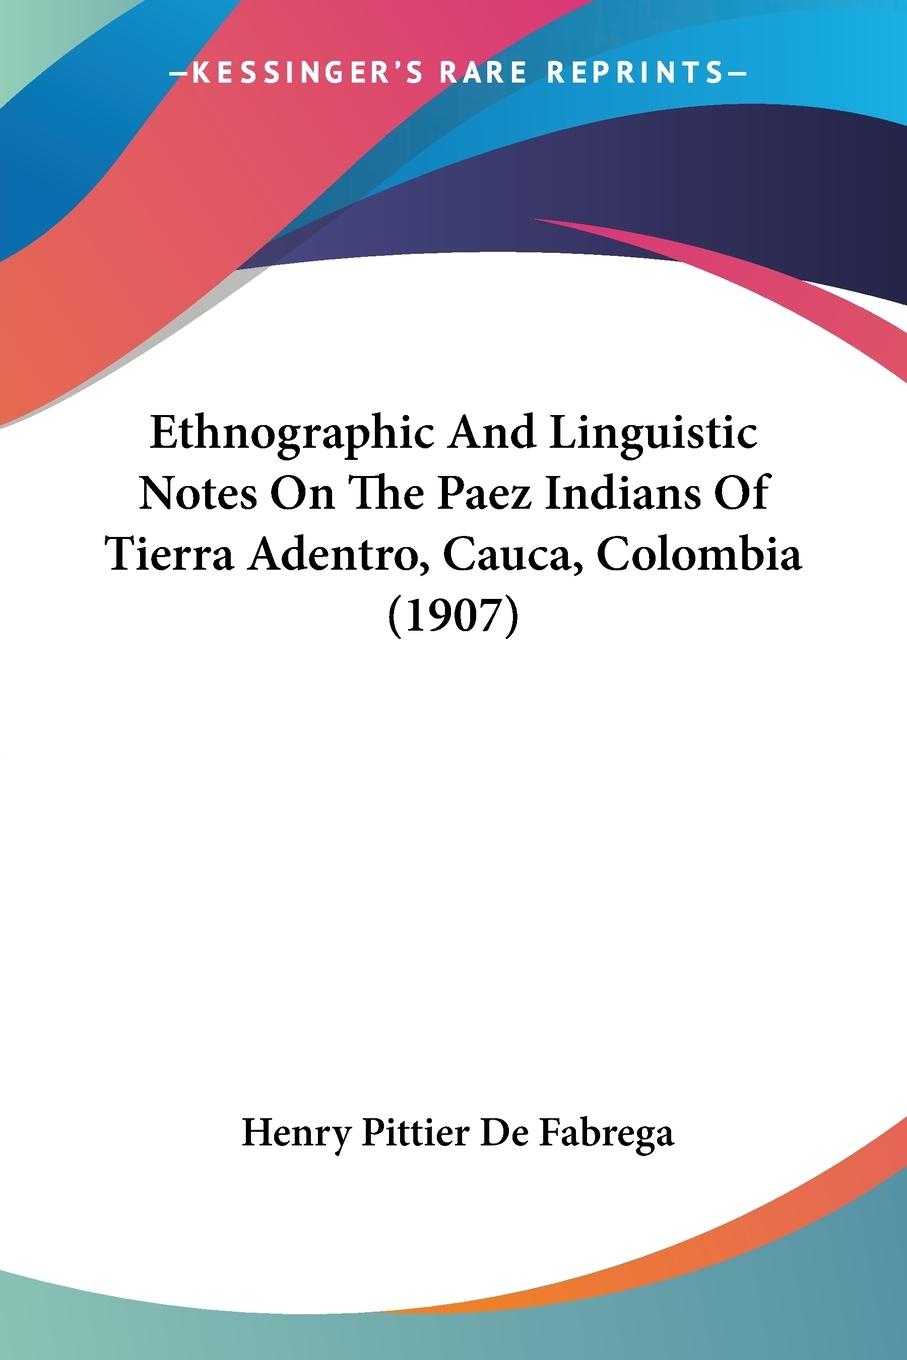 Ethnographic And Linguistic Notes On The Paez Indians Of Tierra Adentro, Cauca, Colombia (1907) - Fabrega, Henry Pittier De